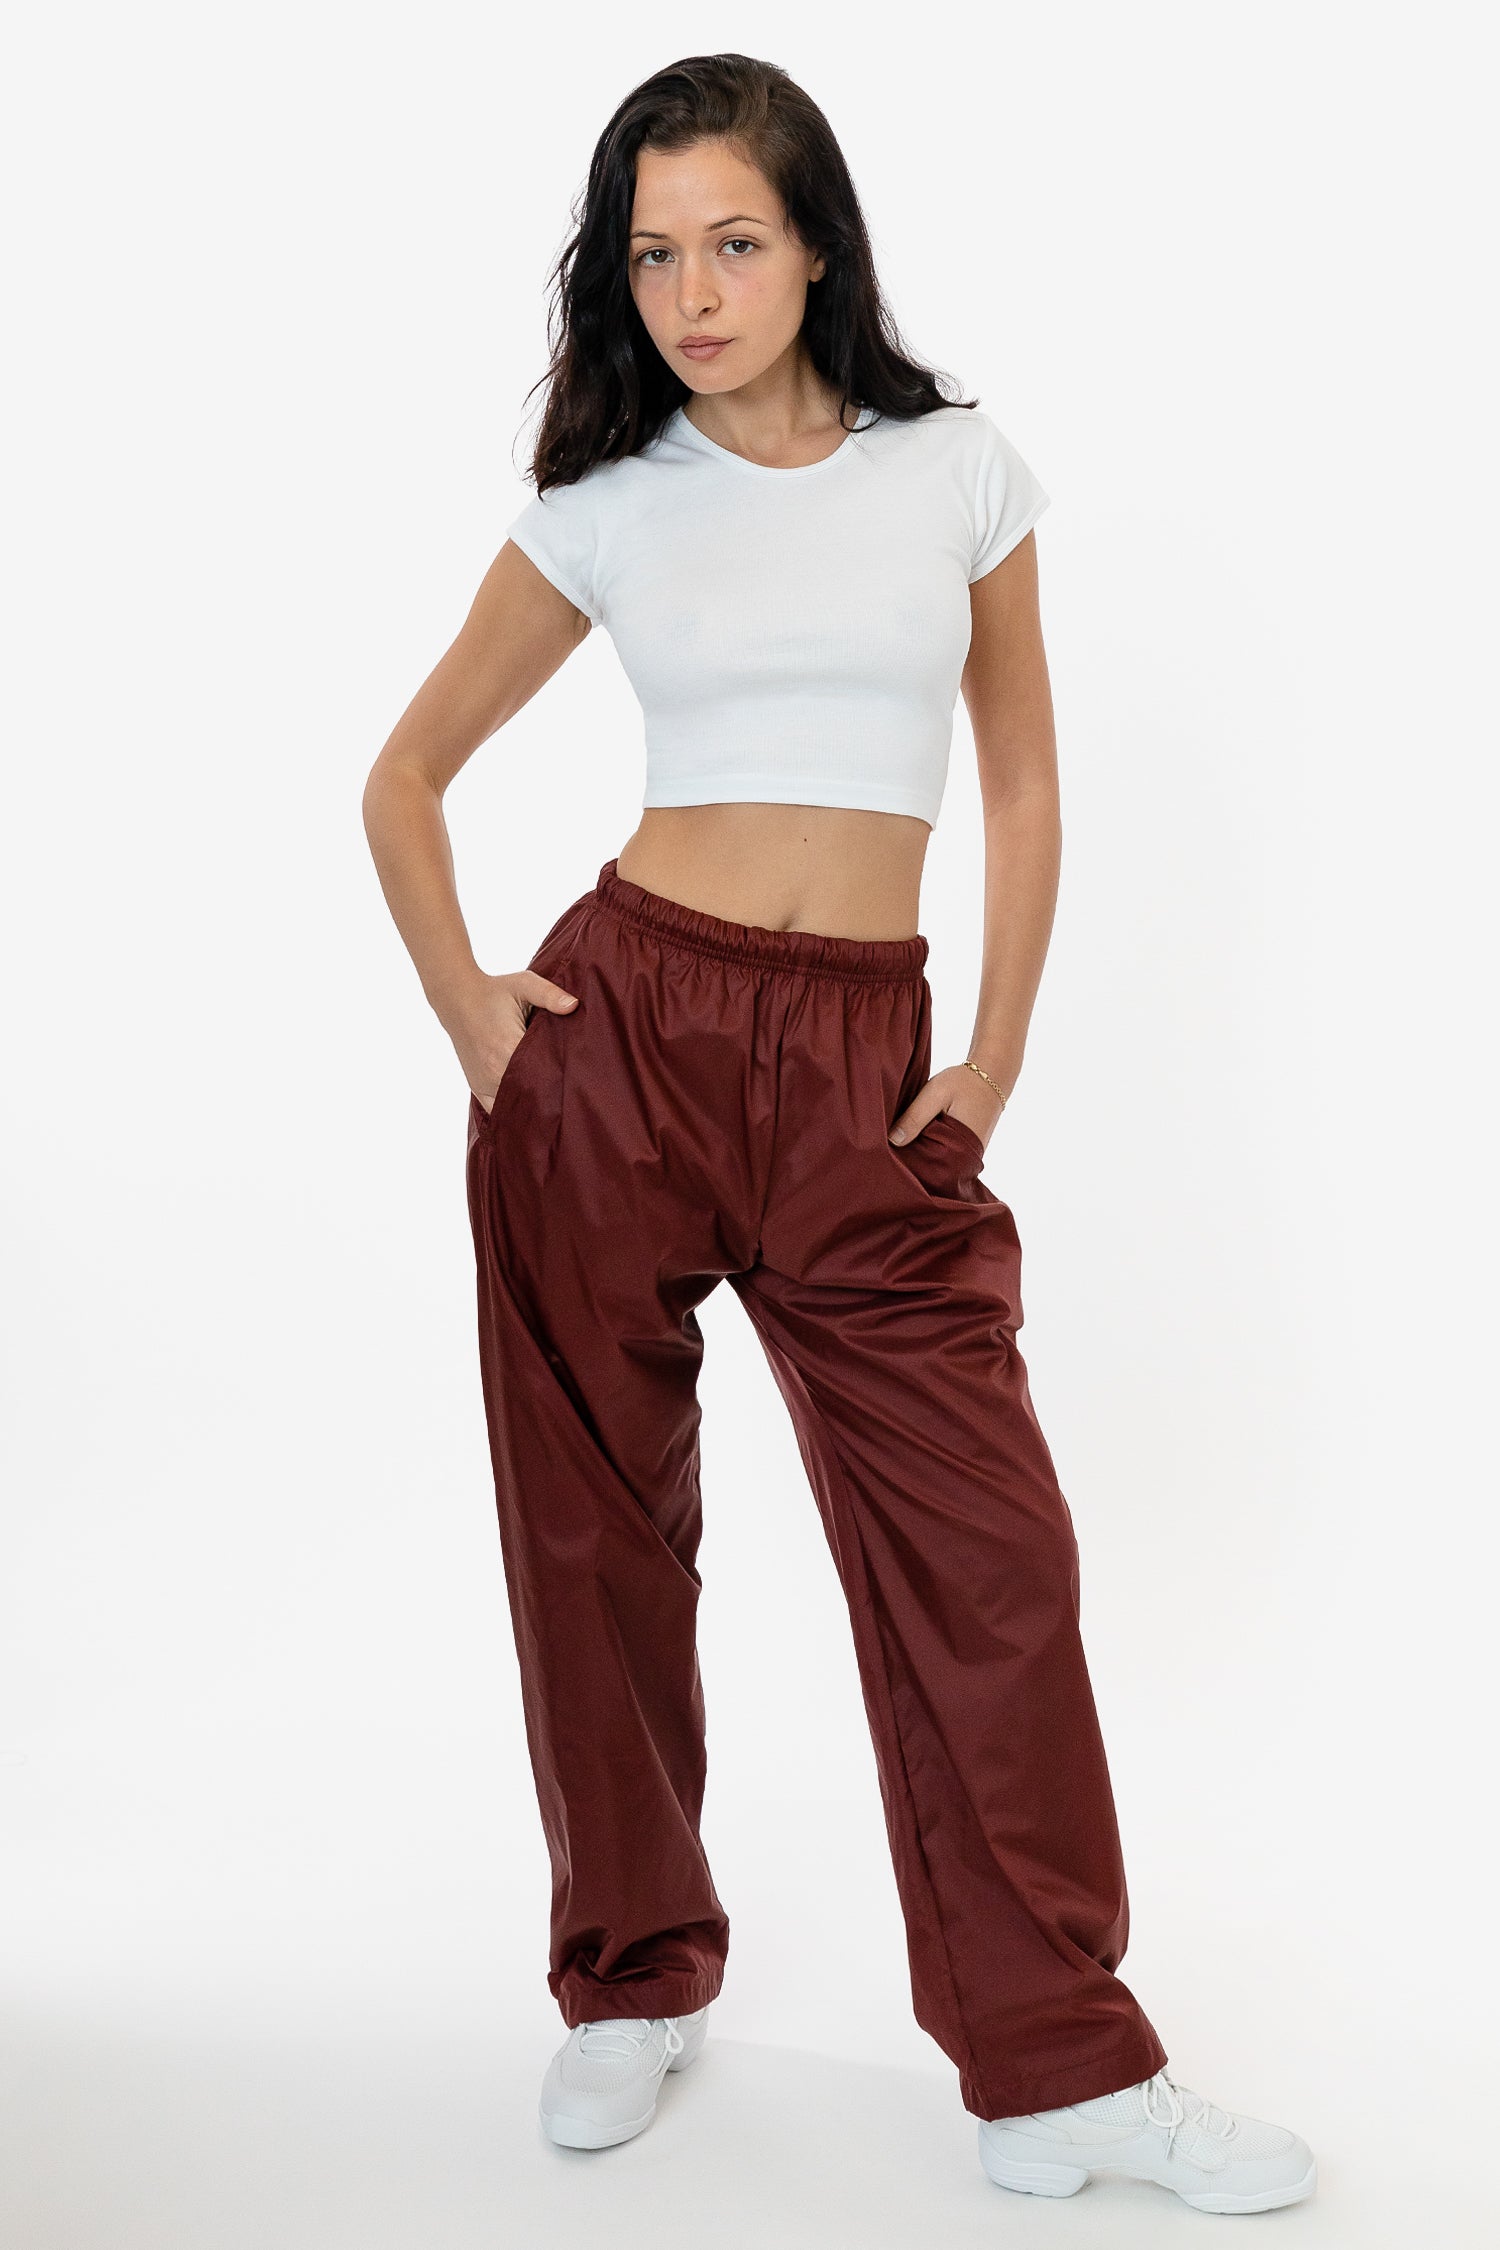 Everyday Transitional Maternity Smocked Linen Pant